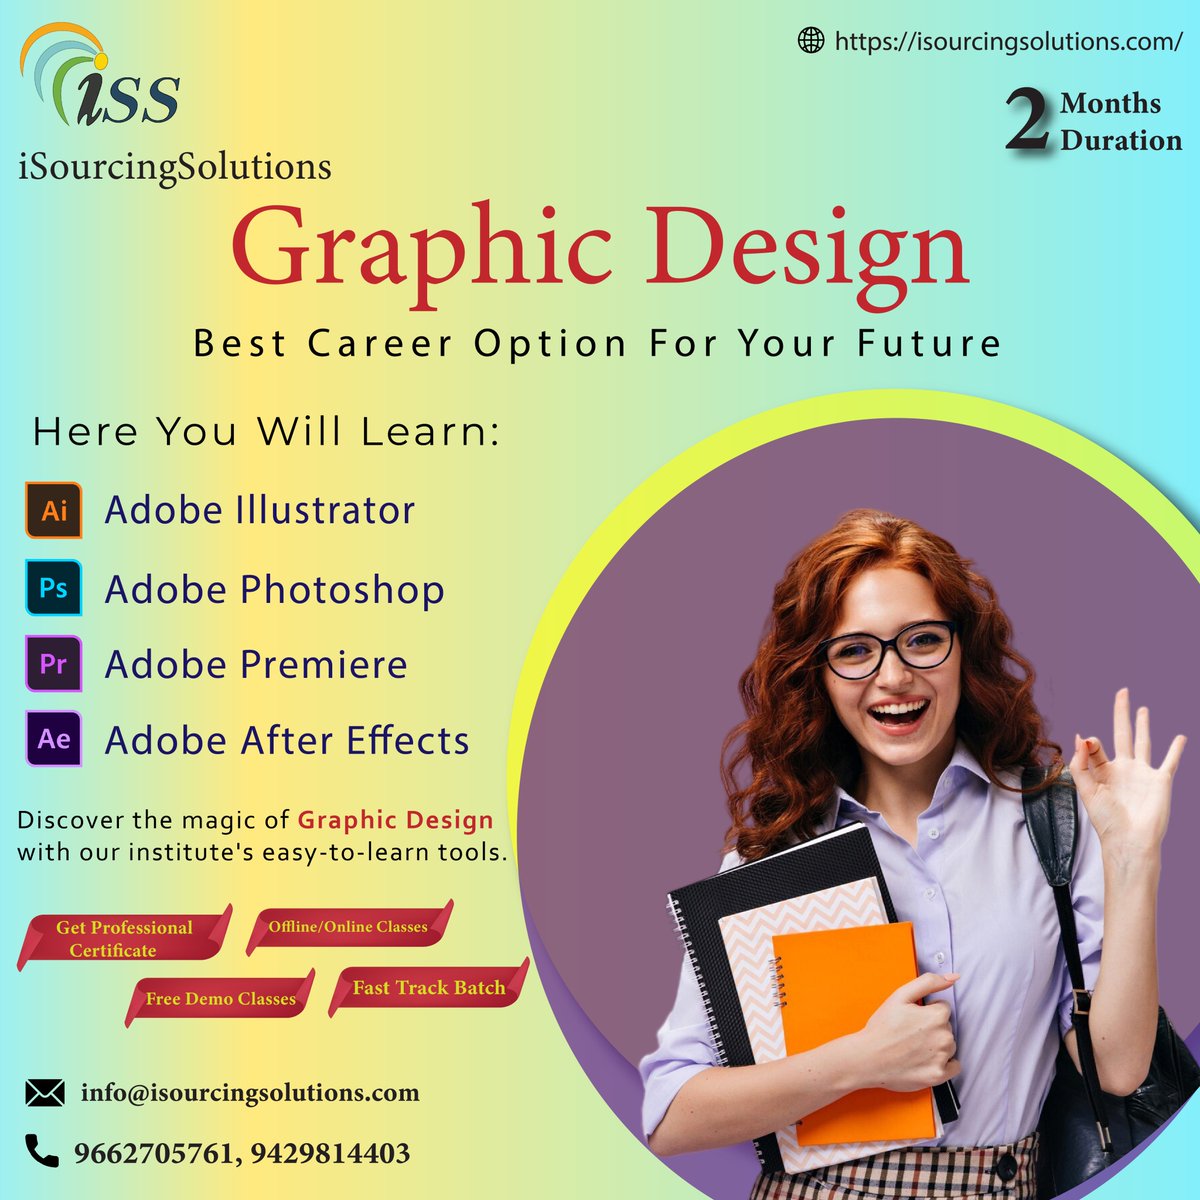 Our institute's graphic design tools are here to empower you.
#GraphicDesign #Animation #Illustration #MotionGraphics #DigitalArt #VisualEffects #GraphicArt #Cartoon #Storyboarding #3DAnimation #CharacterDesign #VectorArt #ArtDirection
#Typography #LogoDesign #VideoEditing